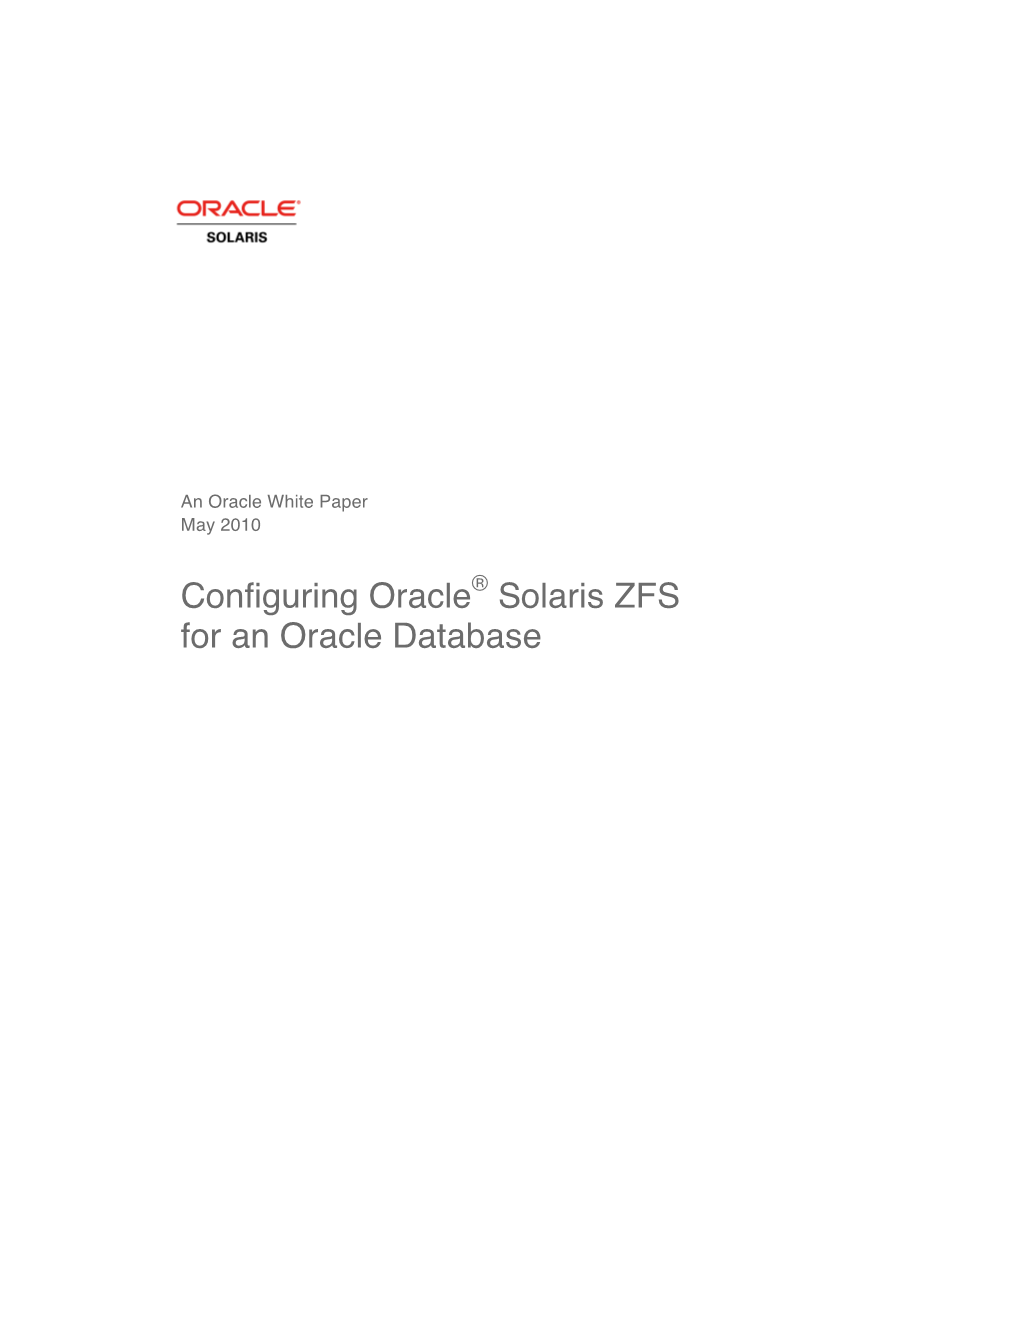 Configuring Oracle Solaris ZFS for an Oracle Database